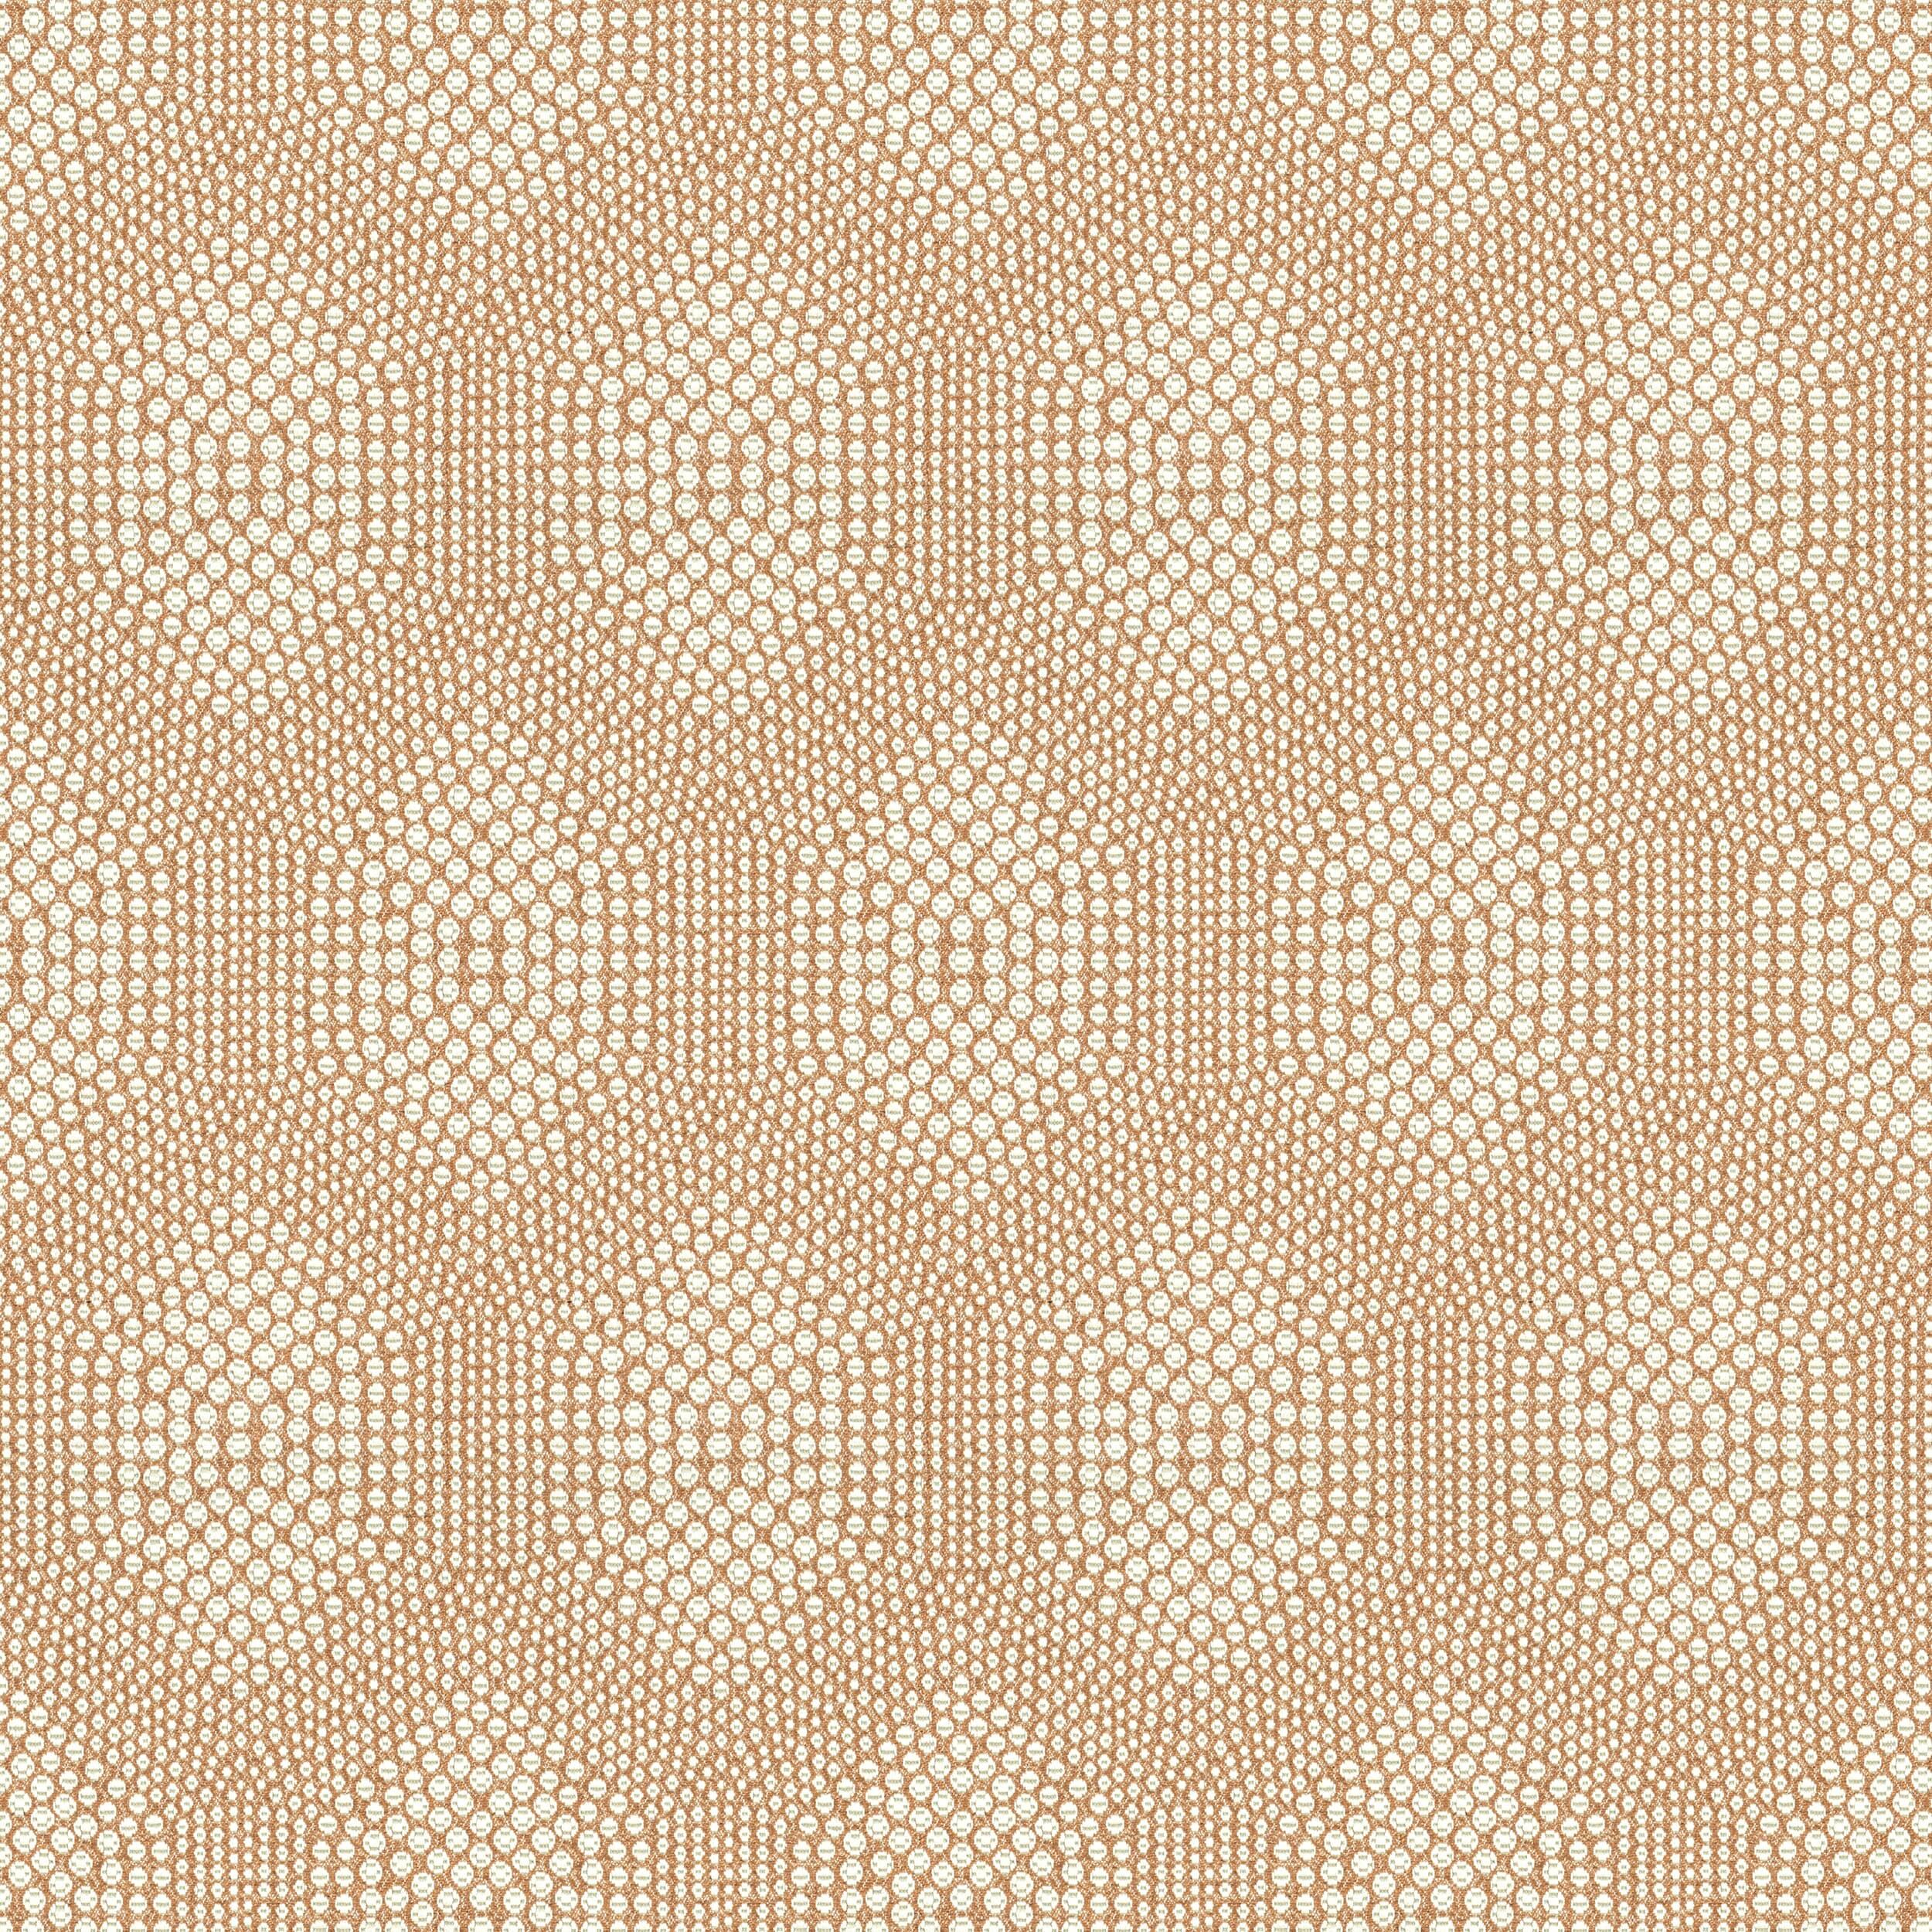 7802-21 Connect The Dots Desert by Stout Fabric